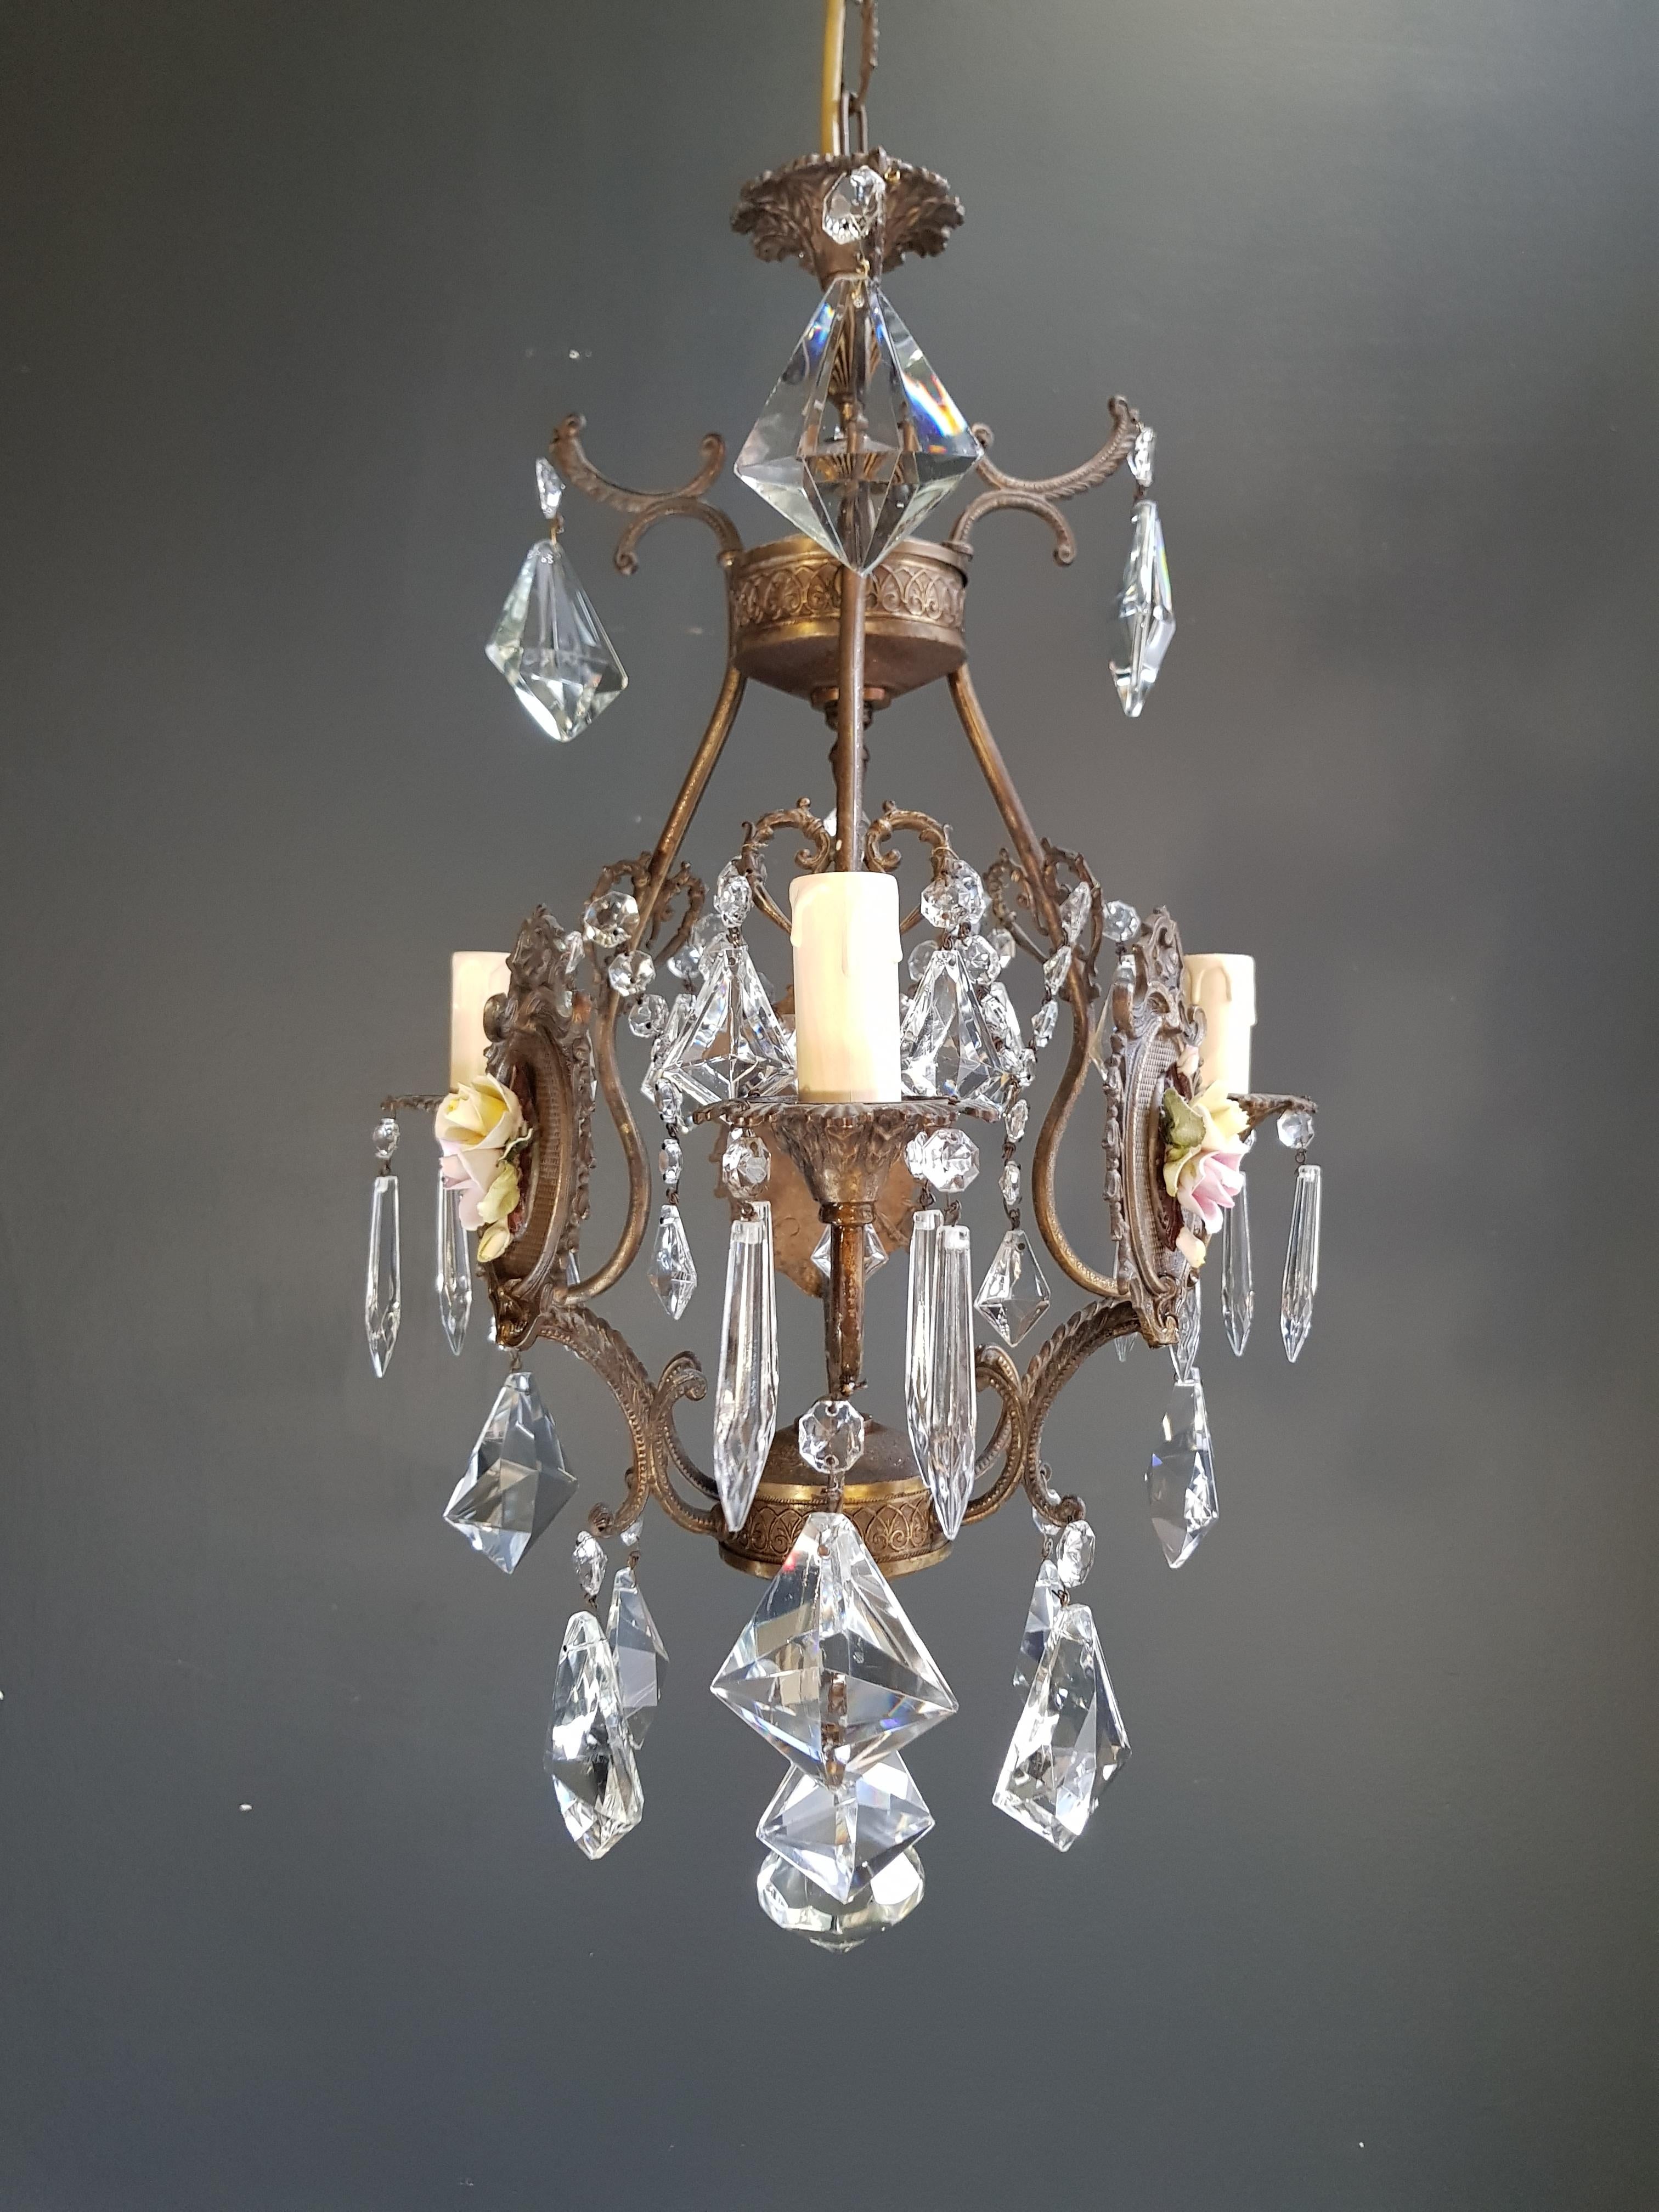 Mid-20th Century Fine Porcelain Cage Yellow Pink Crystal Chandelier Antique Ceiling Lamp Lustre